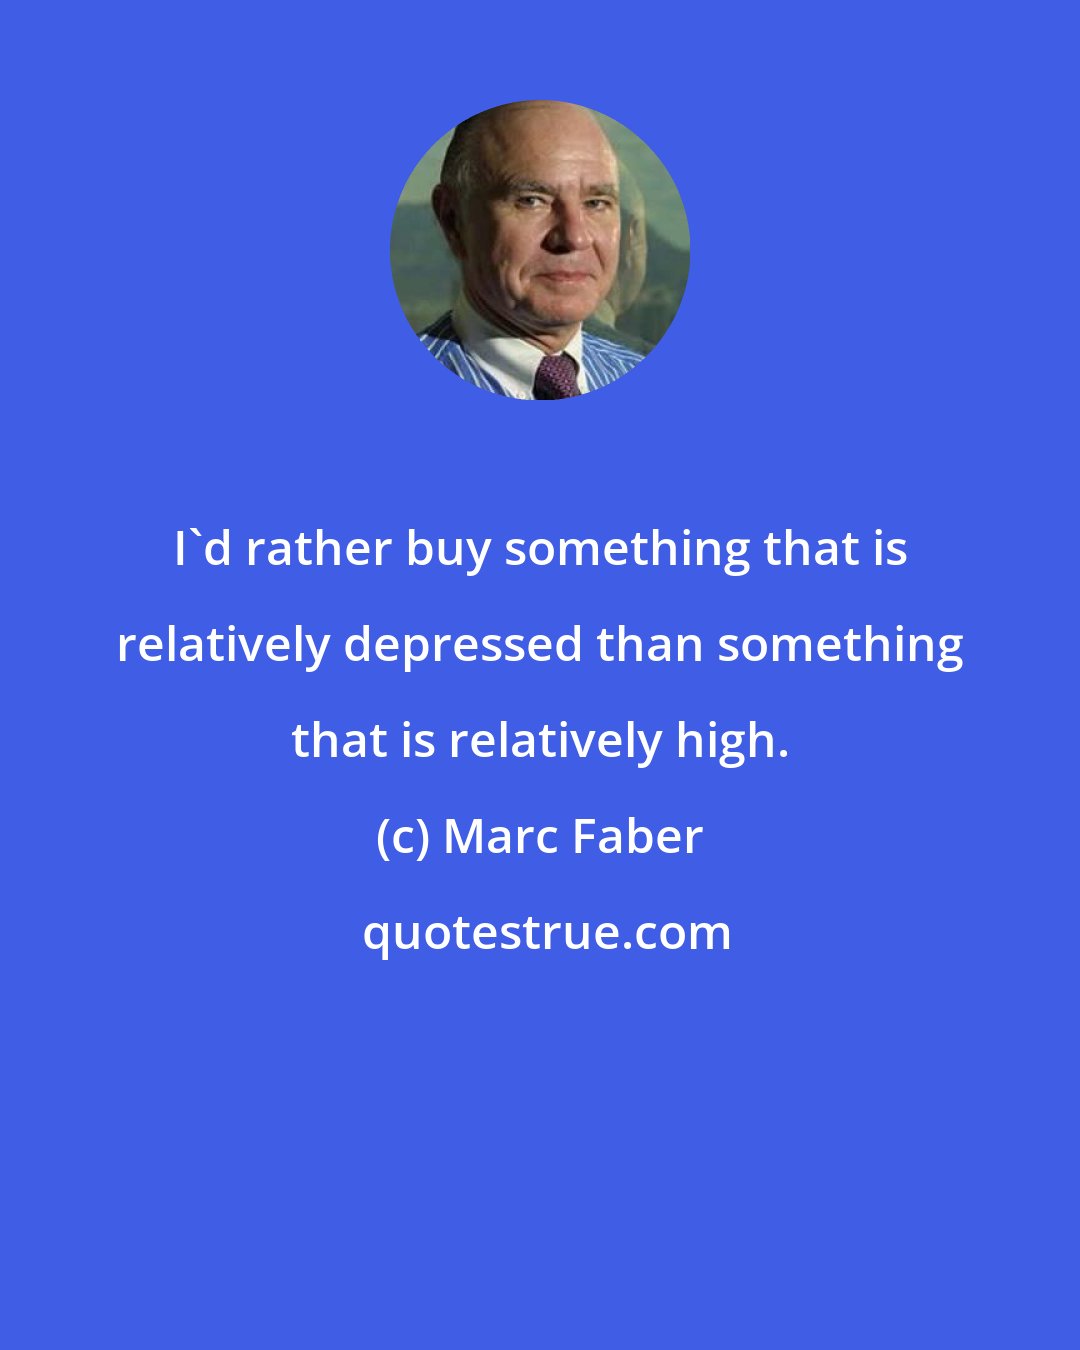 Marc Faber: I'd rather buy something that is relatively depressed than something that is relatively high.